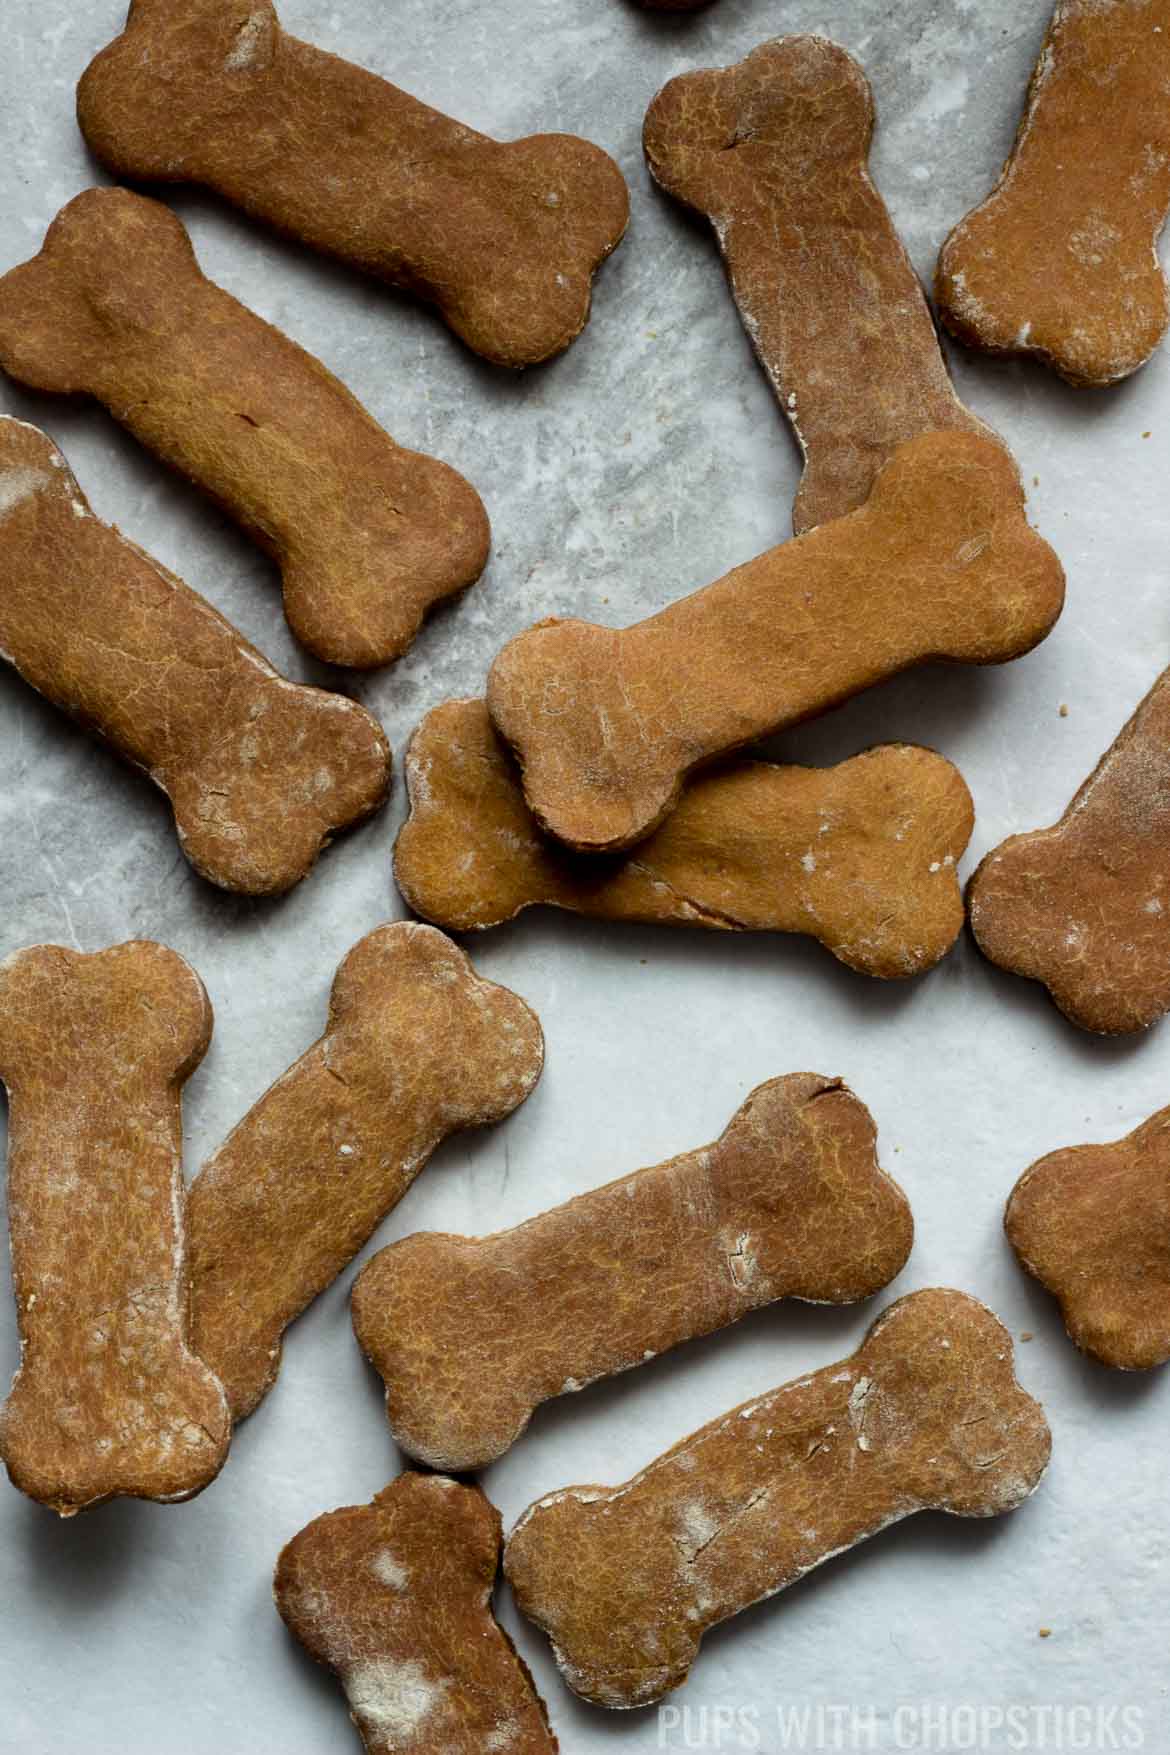 Grain free dog treats scattered on table